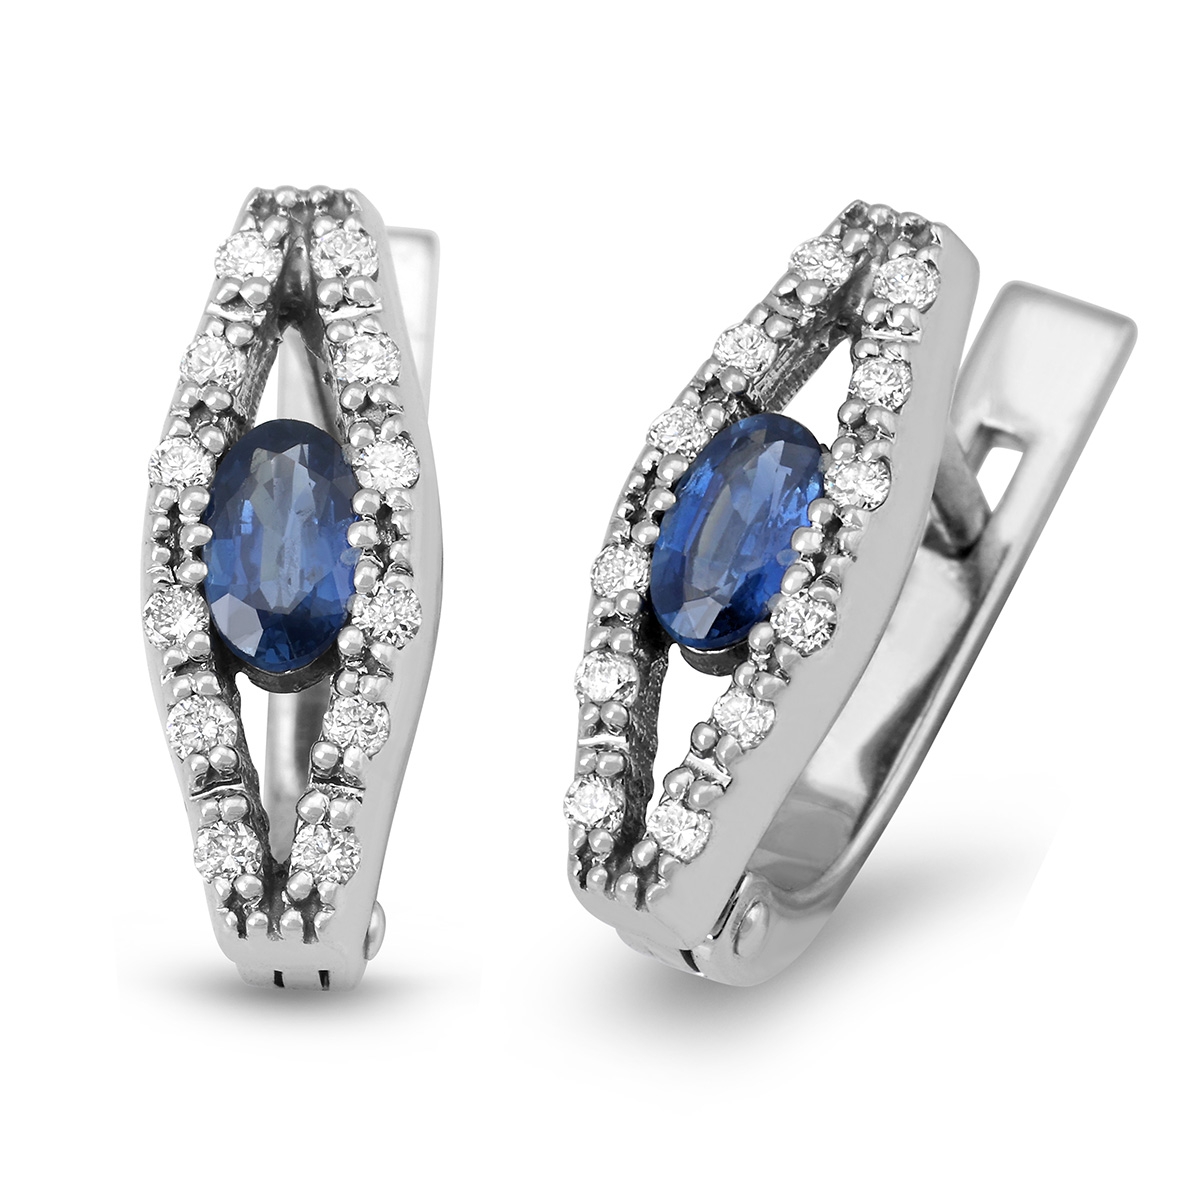 Anbinder Jewelry 14K White Gold Evil Eye Earrings with Diamonds and Sapphires - 1